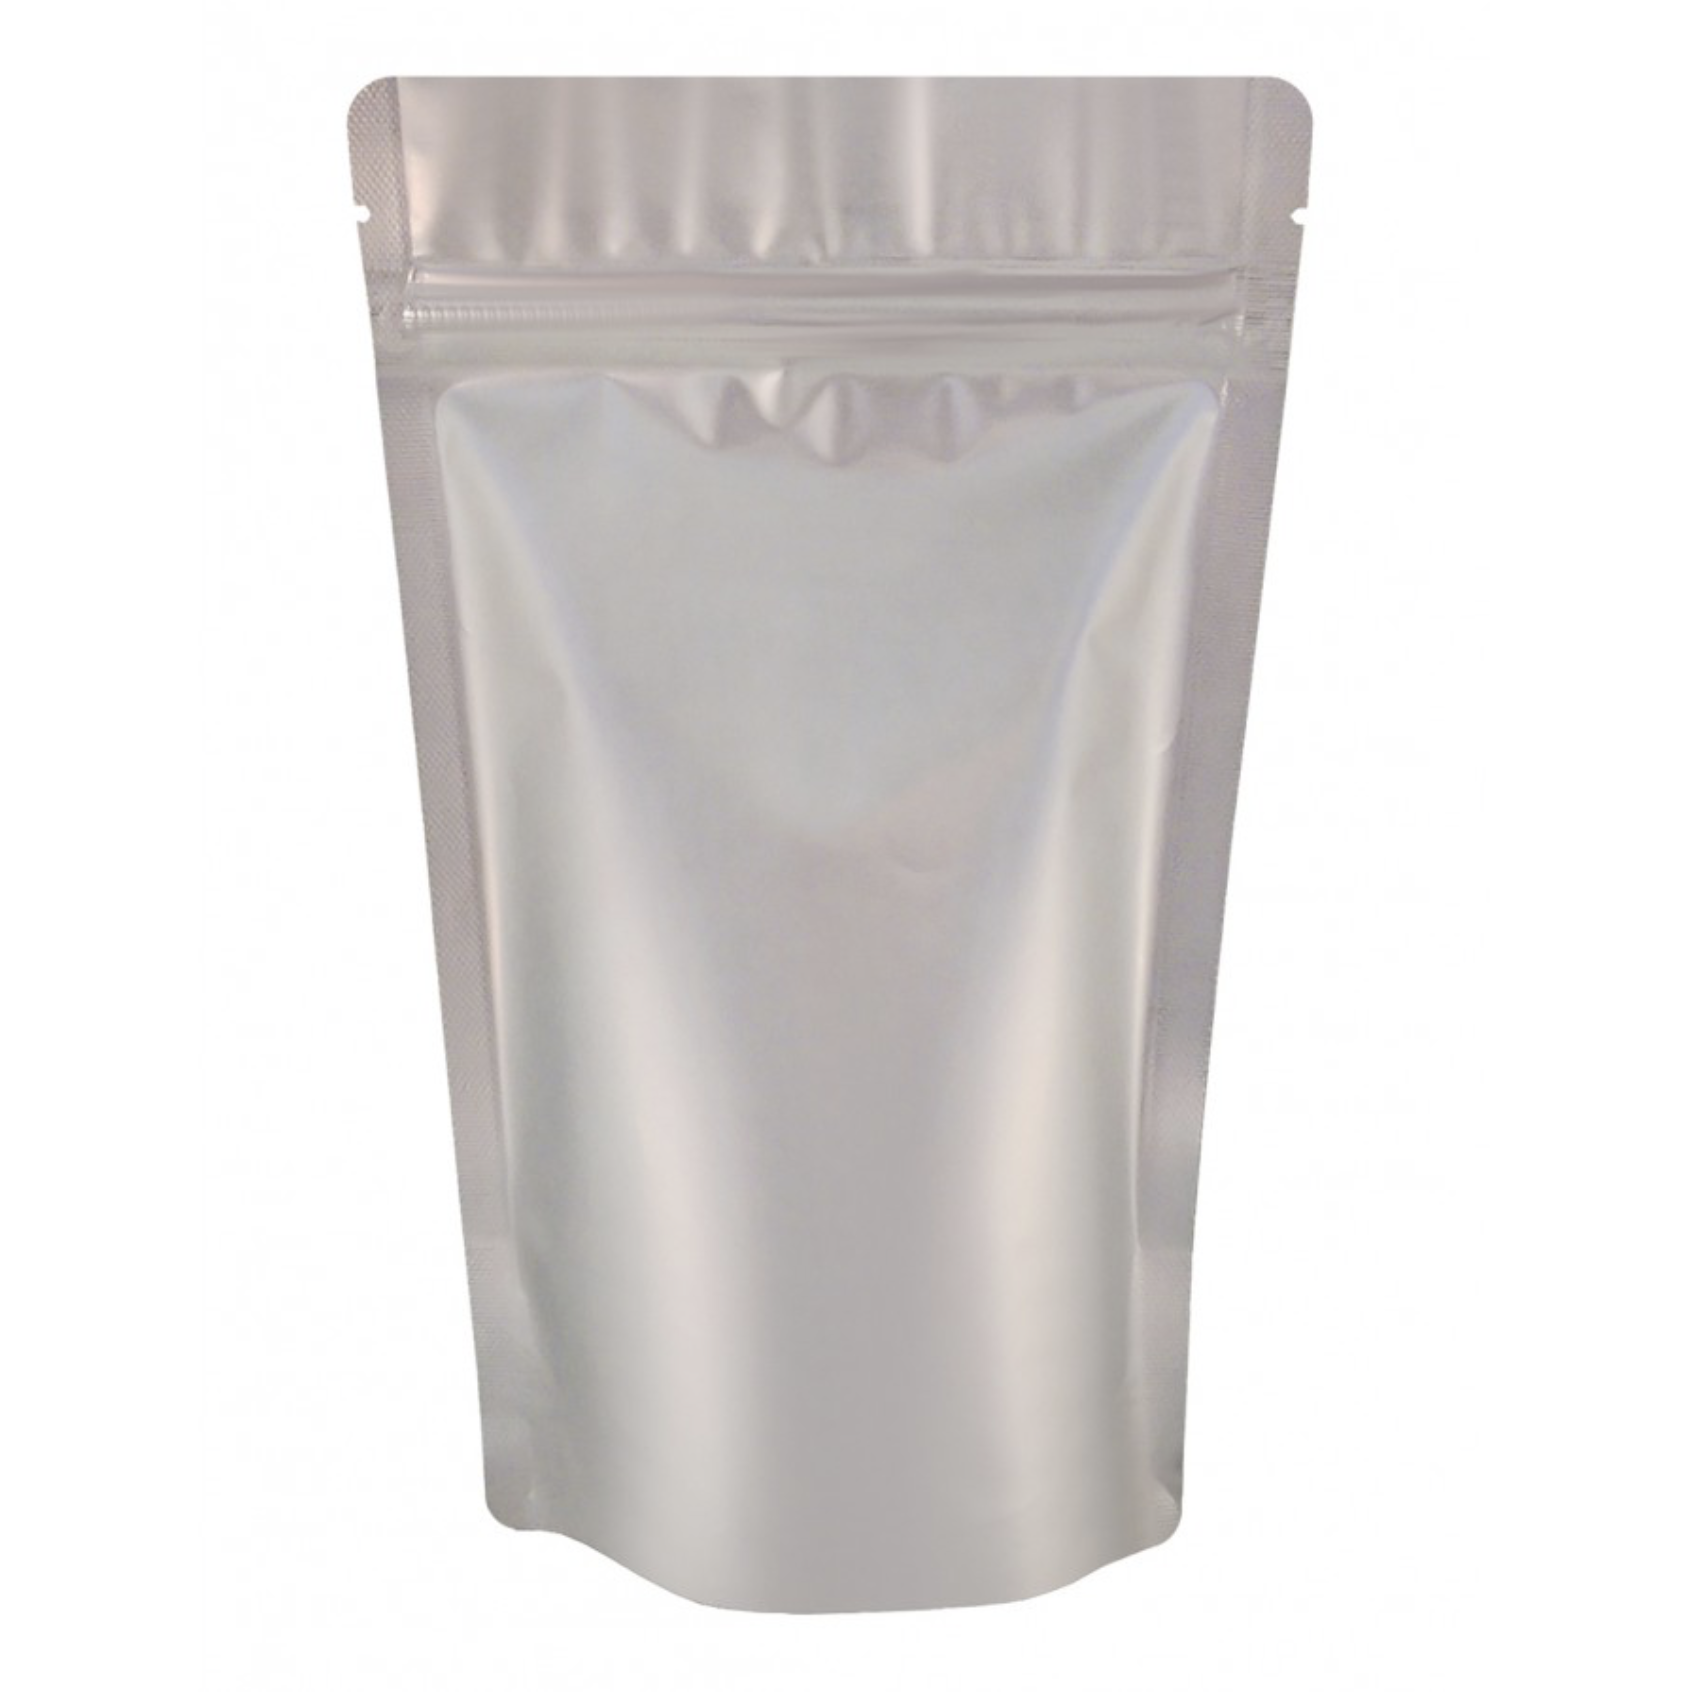 Stand-up mylar pouch for vacuum sealing